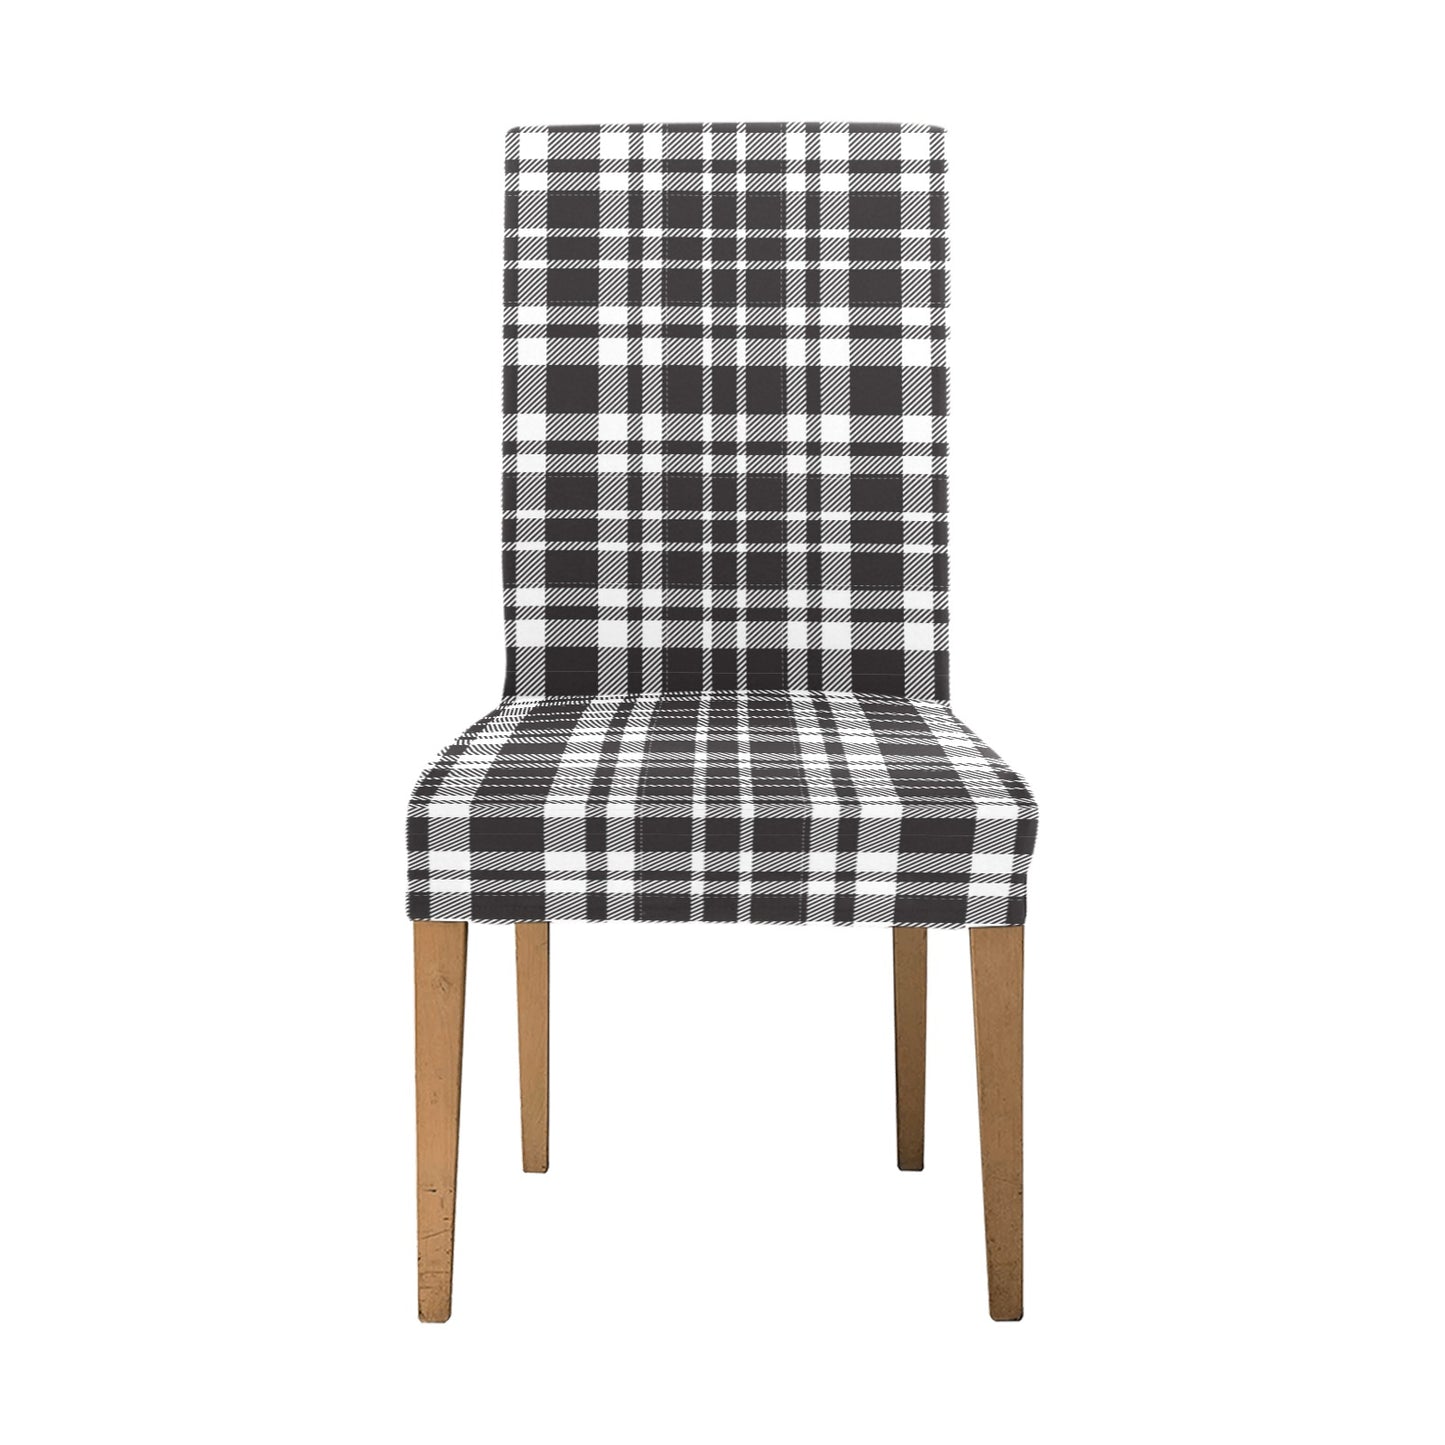 Buffalo Check Dining Chair Seat Covers, Black White Check Plaid Stretch Slipcover Furniture Dining Room Home Decor Starcove Fashion